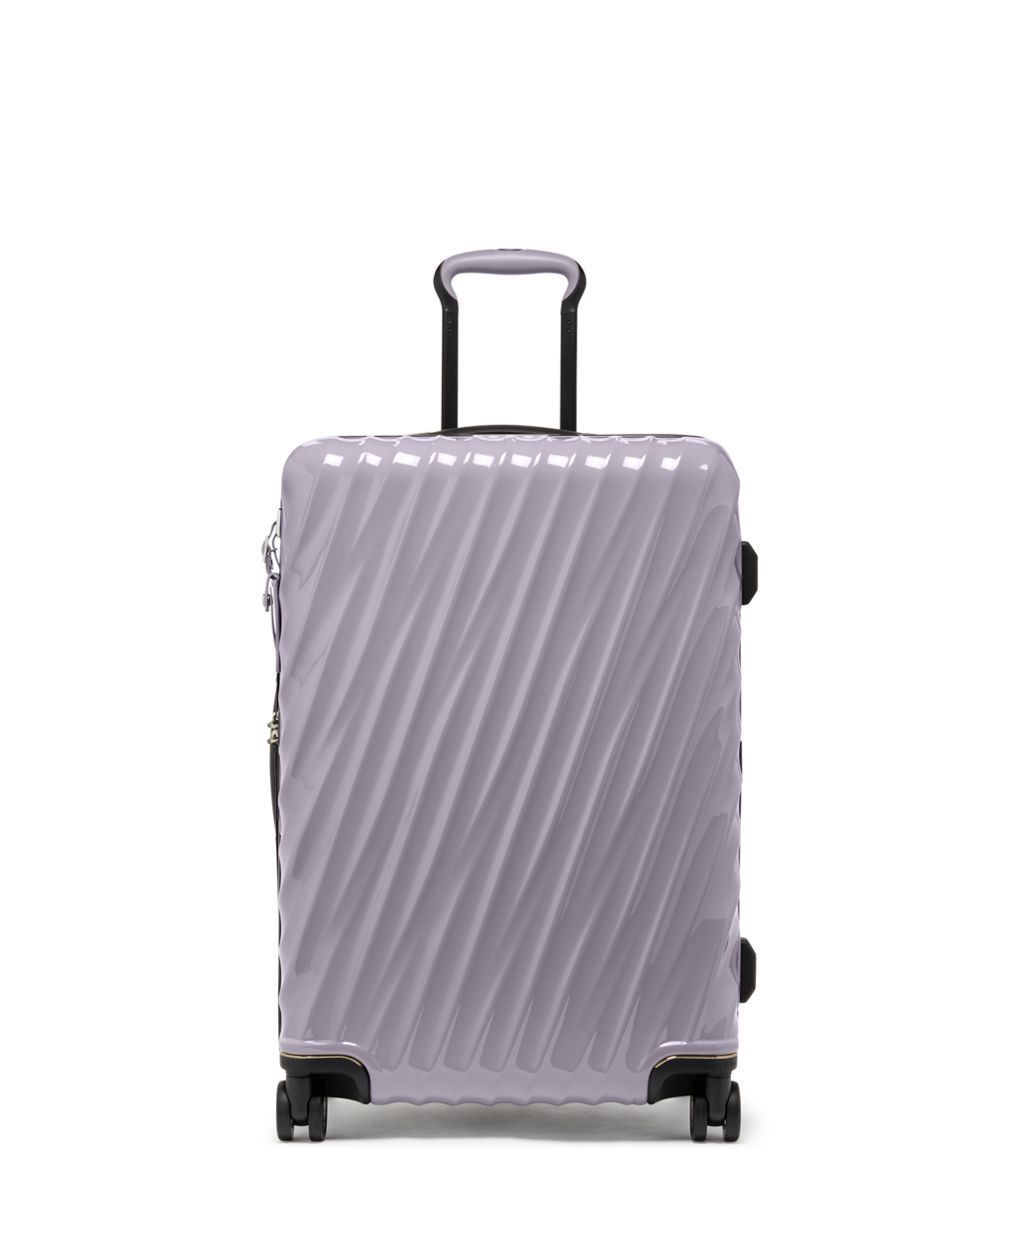 <p><strong>$895.00</strong></p><p><a href="https://go.redirectingat.com?id=74968X1553576&url=https%3A%2F%2Fwww.tumi.com%2Fp%2Fshort-trip-expandable-4-wheeled-packing-case-01396851954&sref=https%3A%2F%2Fwww.harpersbazaar.com%2Ffashion%2Ftrends%2Fg43844073%2Fbest-luggage-sets%2F">Shop Now</a></p><p>Tumi’s collection of hard-shell packing cases are top of the line, including this lilac roller bag. Having used it on my own travels, I can vouch that it fits more than you’d think and glides smoothly. Plus, the environmentally friendly shell is made from recycled polycarbonate.</p><p><strong>Complete the set:</strong> $1,700 for <a href="https://go.redirectingat.com?id=74968X1553576&url=https%3A%2F%2Fwww.tumi.com%2Fp%2Finternational-expandable-4-wheeled-carry-on-01396831954%2F&sref=https%3A%2F%2Fwww.harpersbazaar.com%2Ffashion%2Ftrends%2Fg43844073%2Fbest-luggage-sets%2F">International Expandable Carry-On</a>, <a href="https://go.redirectingat.com?id=74968X1553576&url=https%3A%2F%2Fwww.tumi.com%2Fp%2Fextended-trip-expandable-4-wheeled-packing-case-01396861954%2F&sref=https%3A%2F%2Fwww.harpersbazaar.com%2Ffashion%2Ftrends%2Fg43844073%2Fbest-luggage-sets%2F">Extended Trip Expandable Packing Case</a></p>